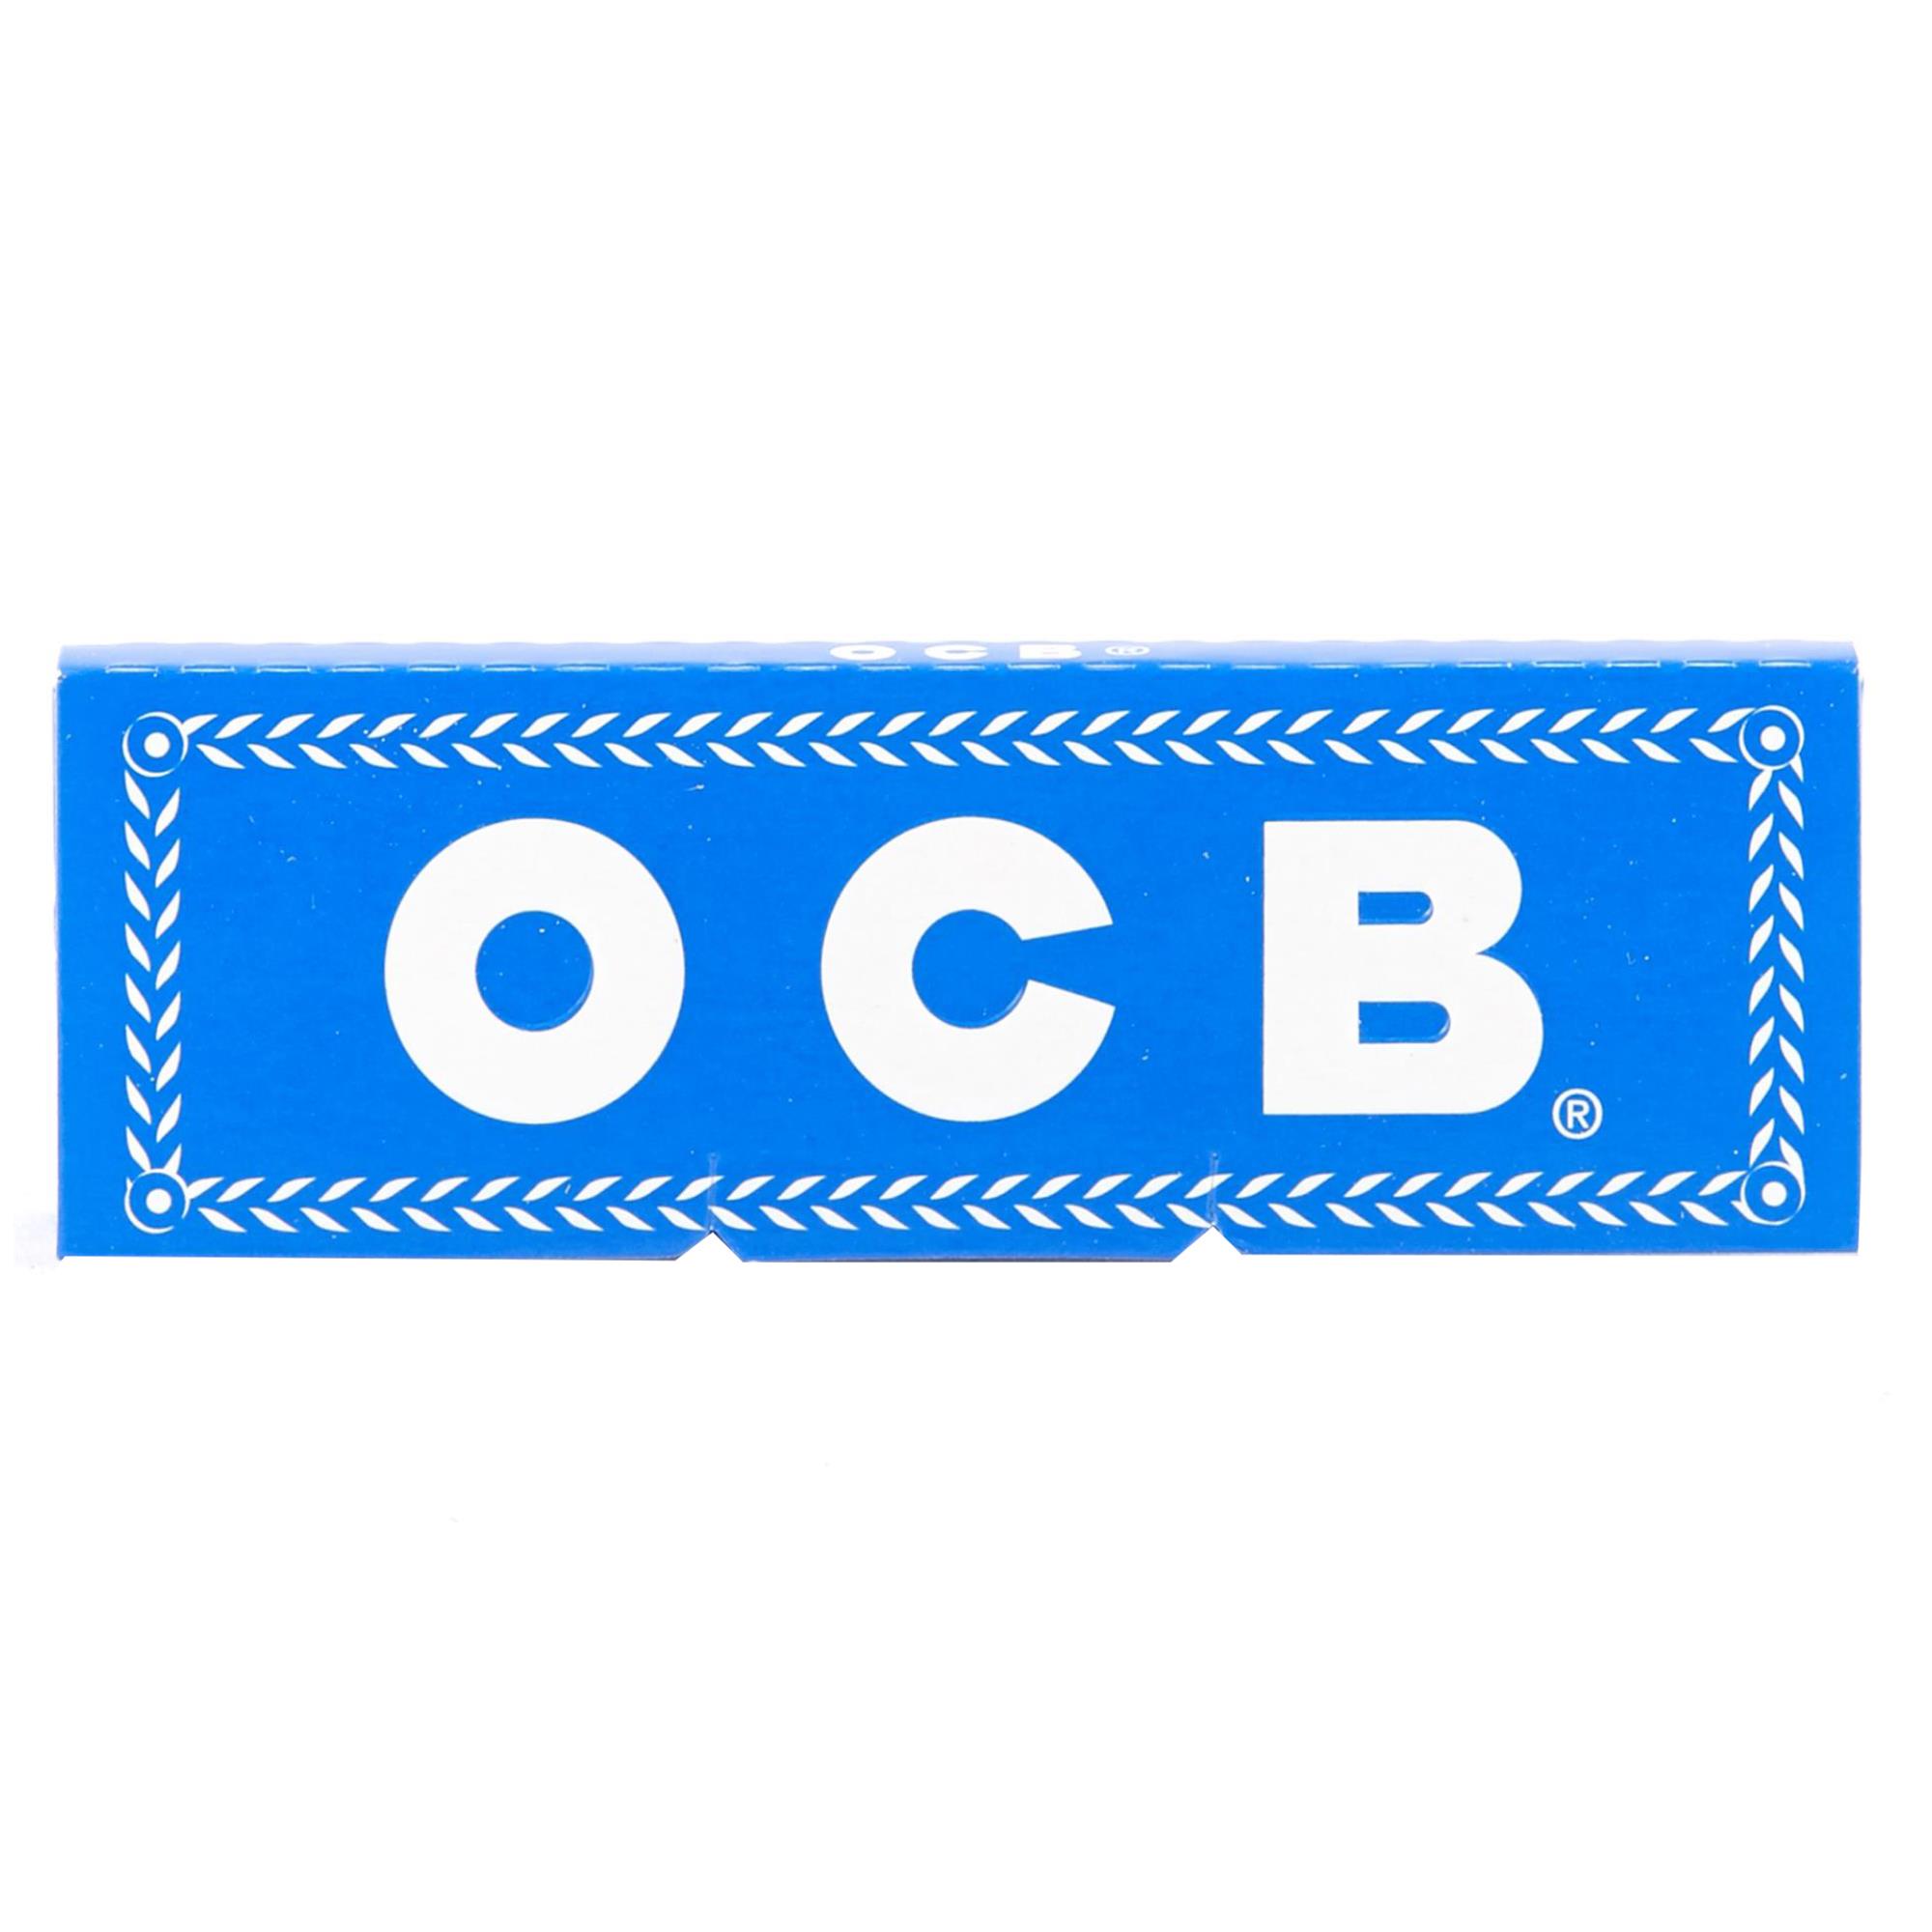 USA Shipper OCB Rolling Papers Blue Chlorine Free SPECIAL Buy 4 @ Only $1.24/Pk 